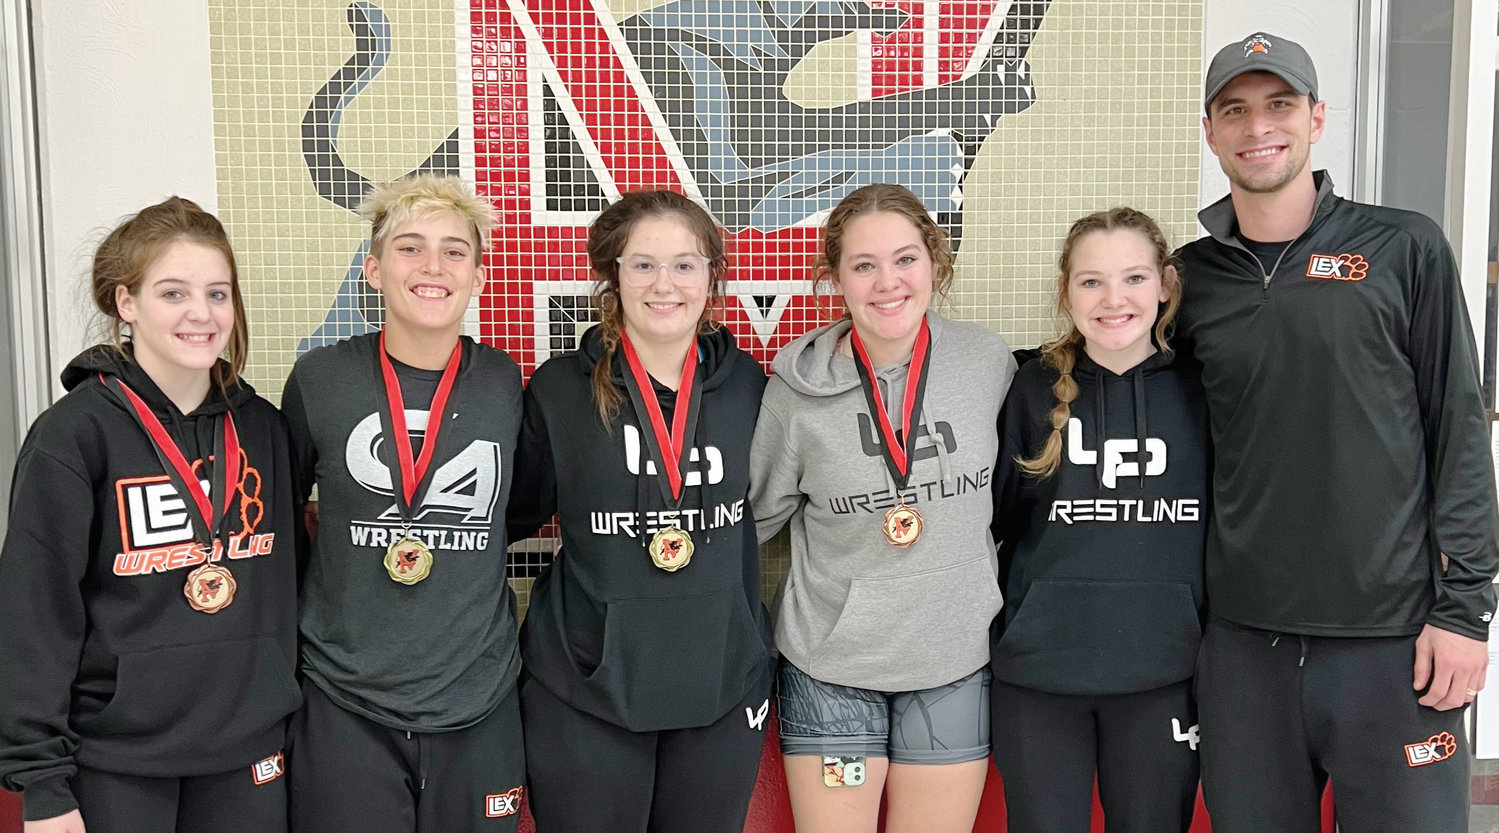 The Lexington girls were crowned tournament champions at the recent Pauls Valley wrestling tournament. From left are Bailey Forbes, Izzy Pack, Cilee Turner, Elexa Collins, Mo Collins and coach Mike McKay. Holding the trophy are Elexa and Mo.